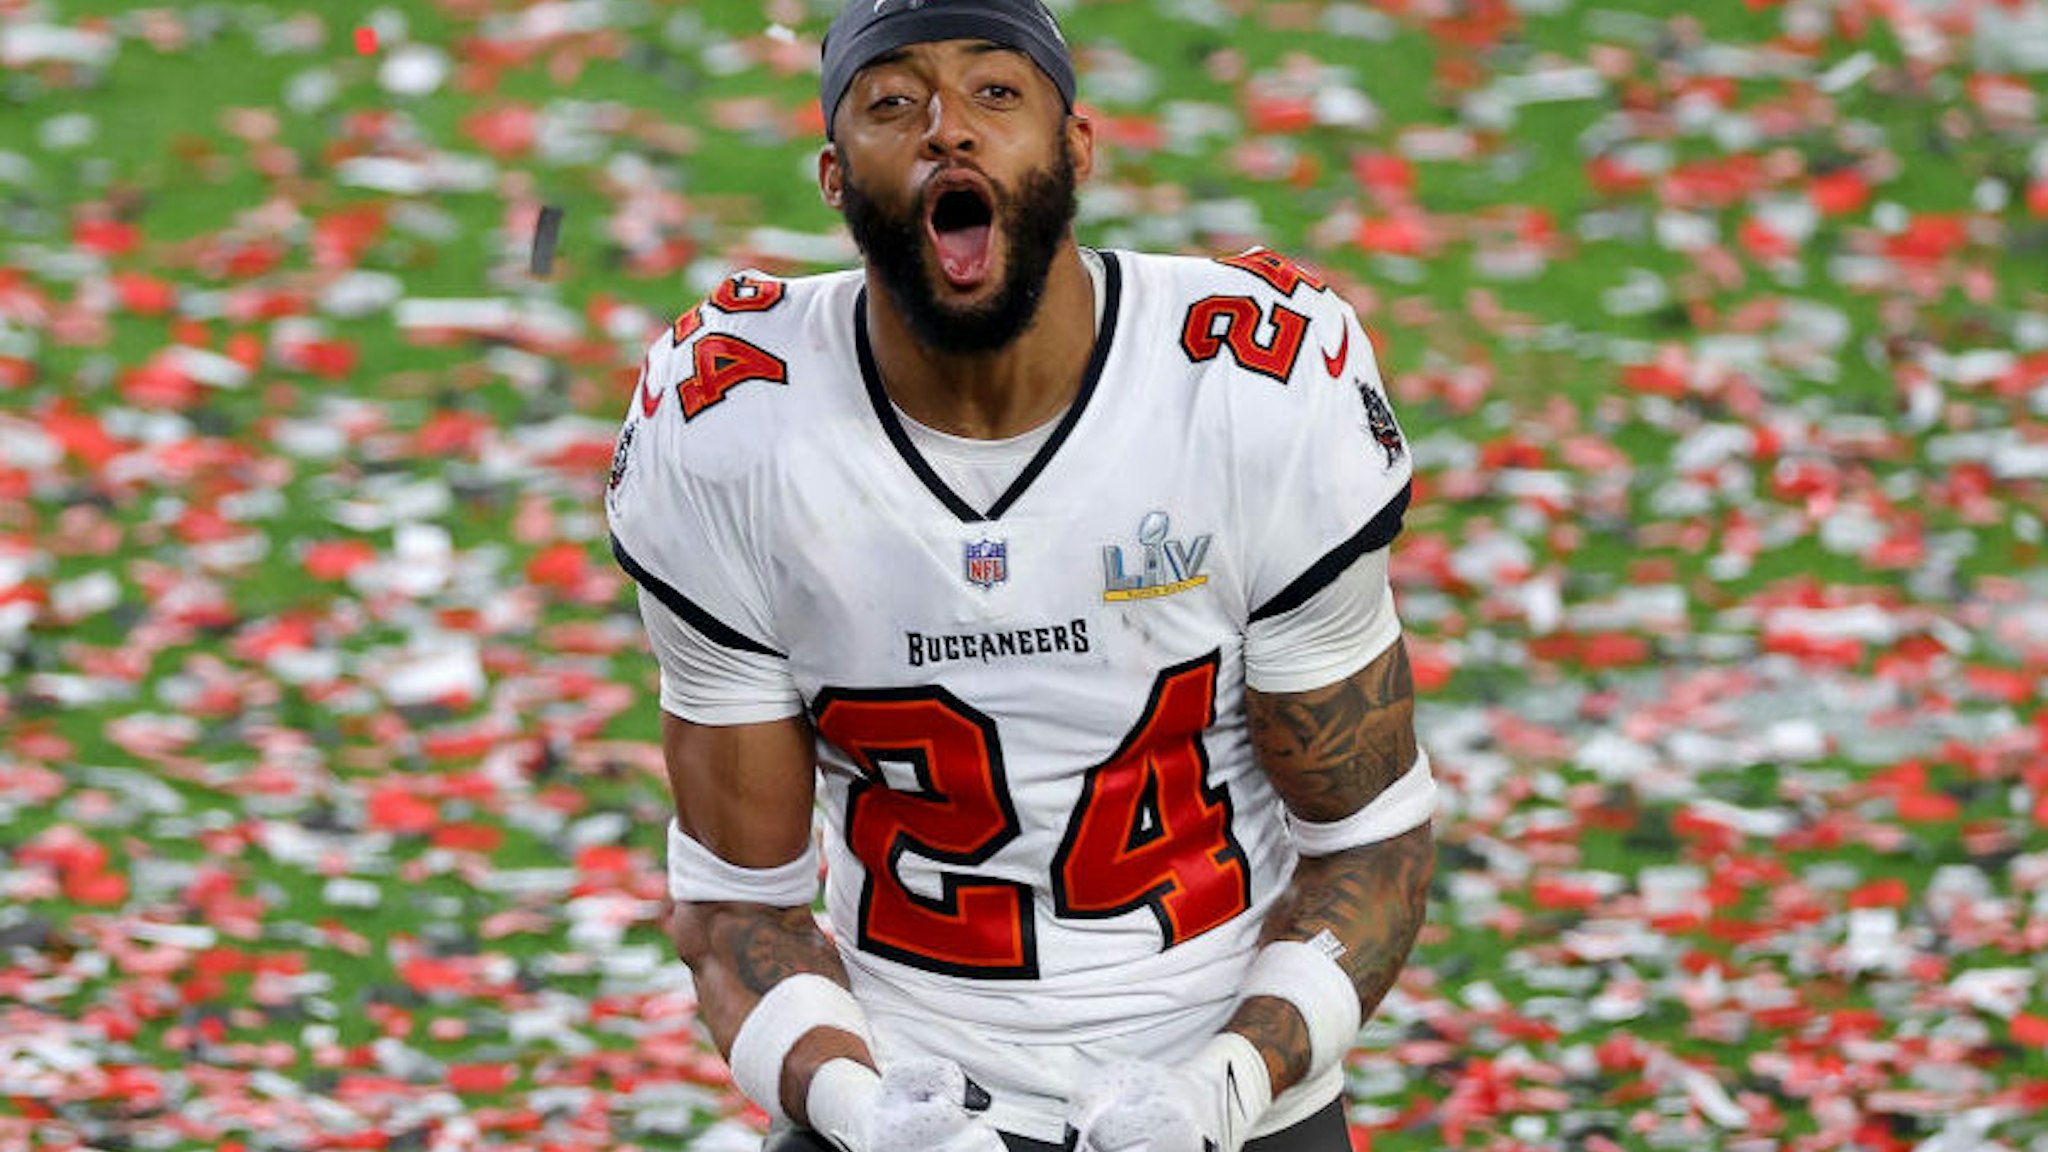 Carlton Davis #24 of the Tampa Bay Buccaneers reacts as confetti falls after defeating the Kansas City Chiefs in Super Bowl LV at Raymond James Stadium on February 07, 2021 in Tampa, Florida.